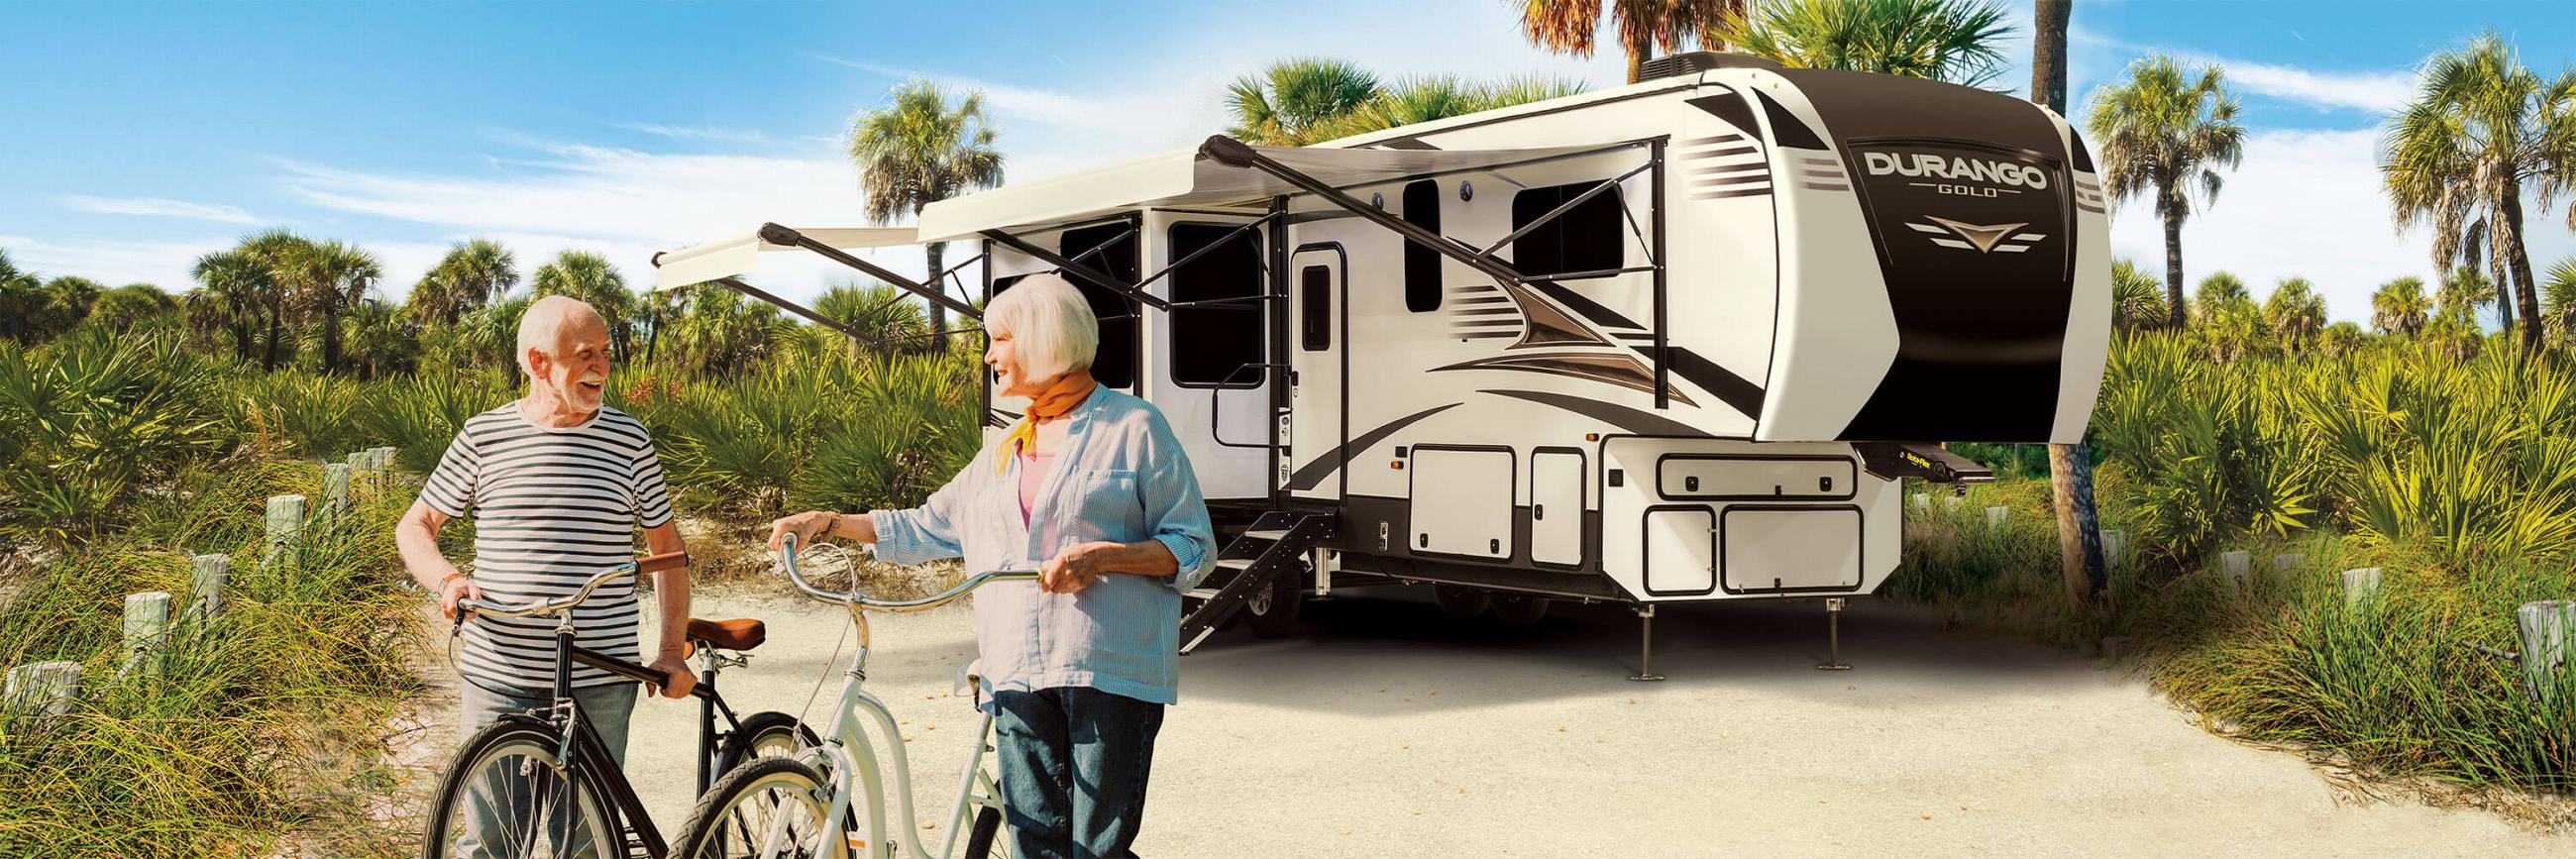 2021 KZ RV Durango Gold G356RLT Fifth Wheel with Couple at Campsite